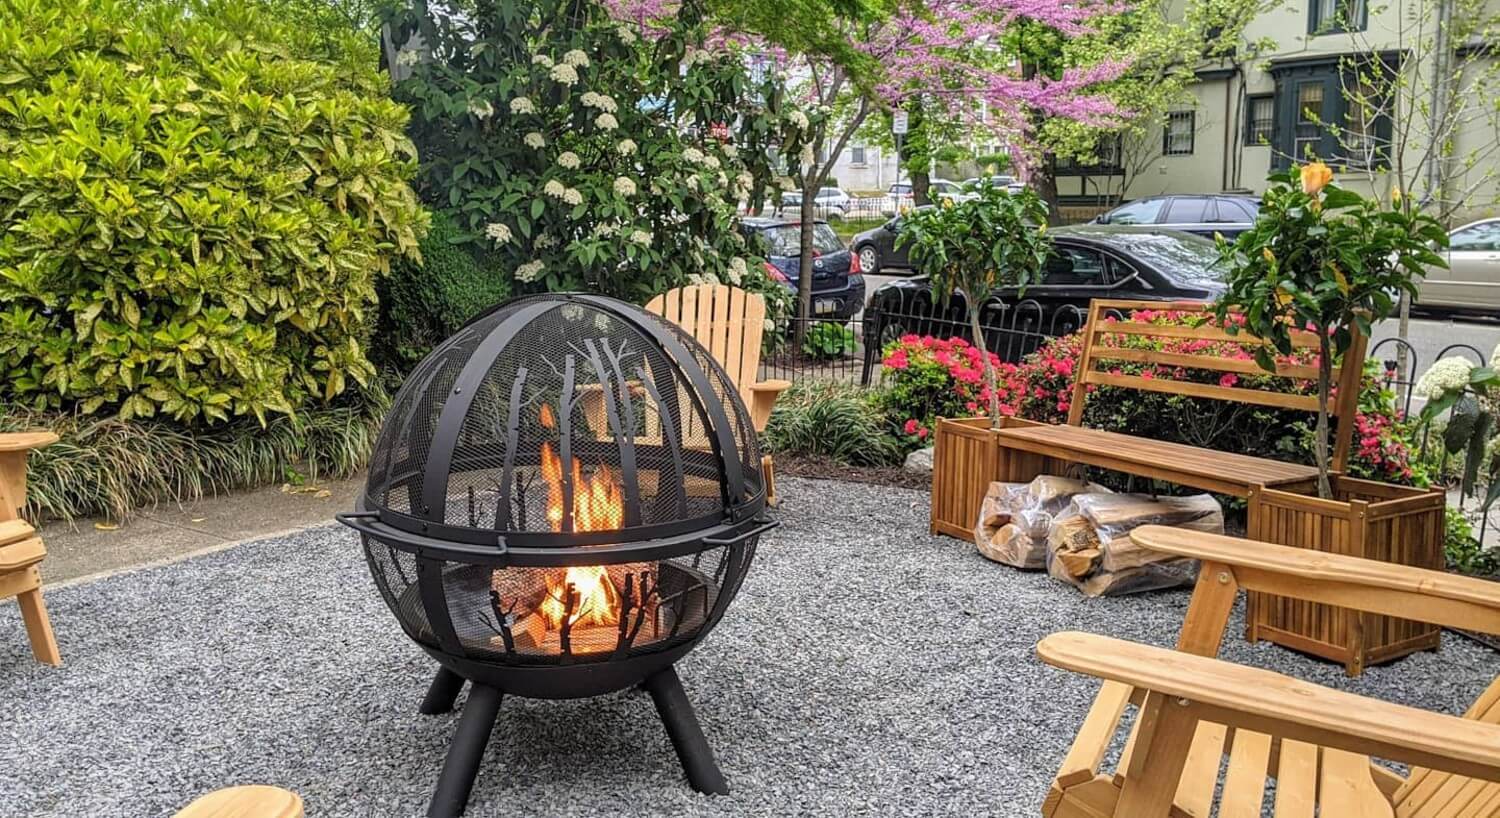 Metal globe outdoor fire pit on a stone patio surrounded by wooden adirondack chairs